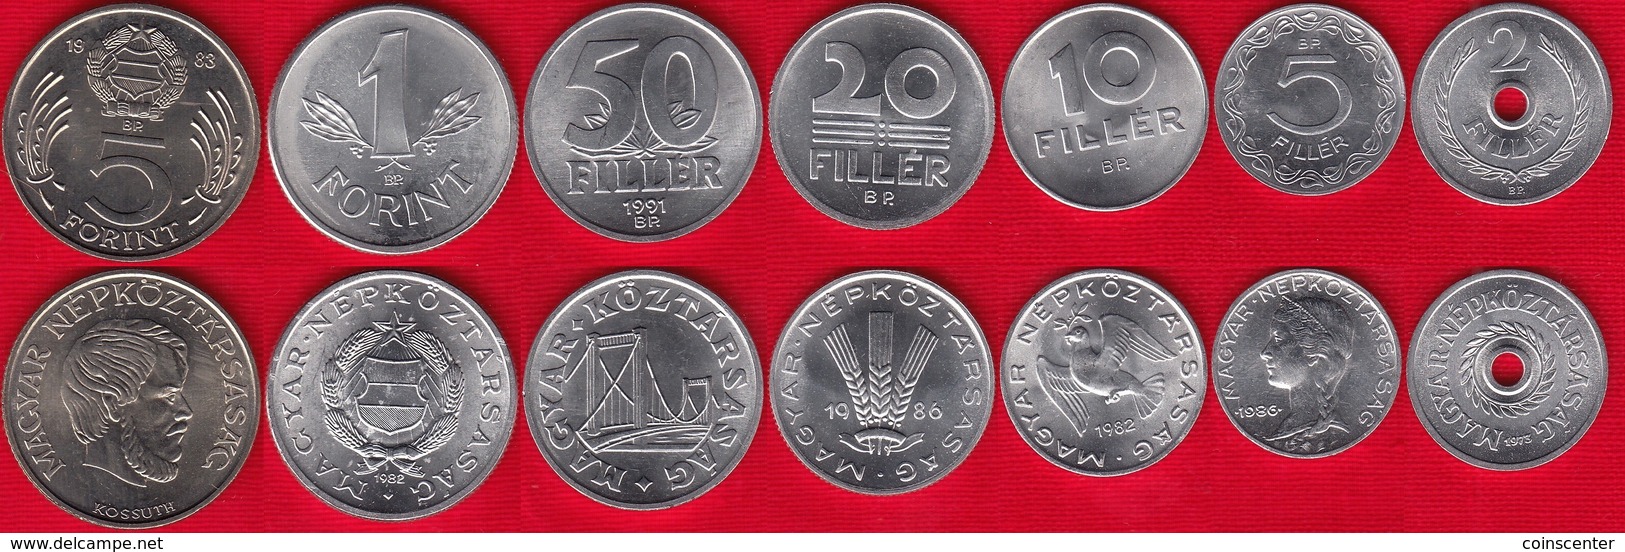 10 HUNGARY COINS FILLER FORINT HUNGARIAN OLD COINS